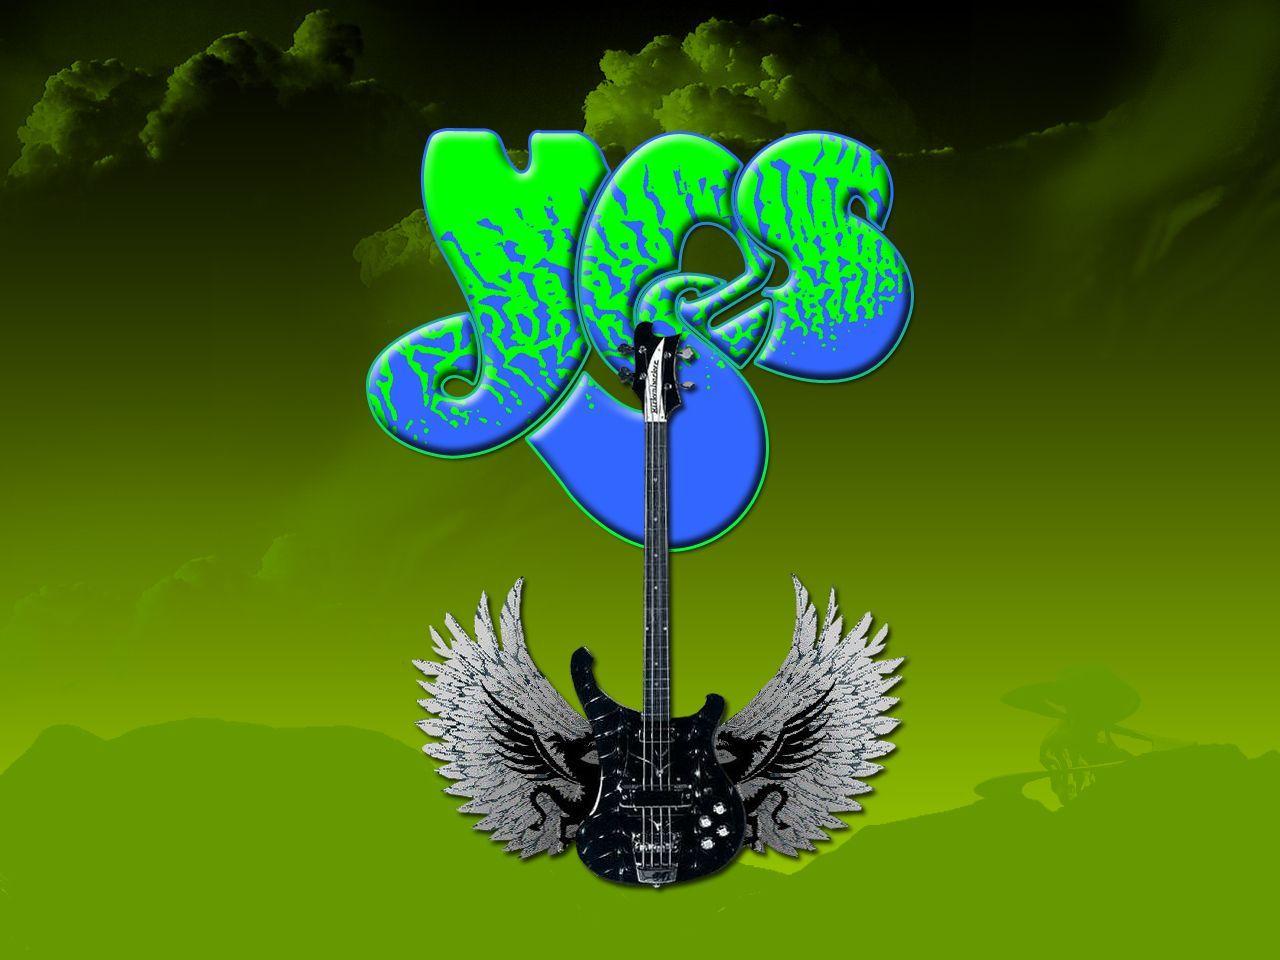 Yes Band Wallpaper. Rock of Ages. post pins. Yes band